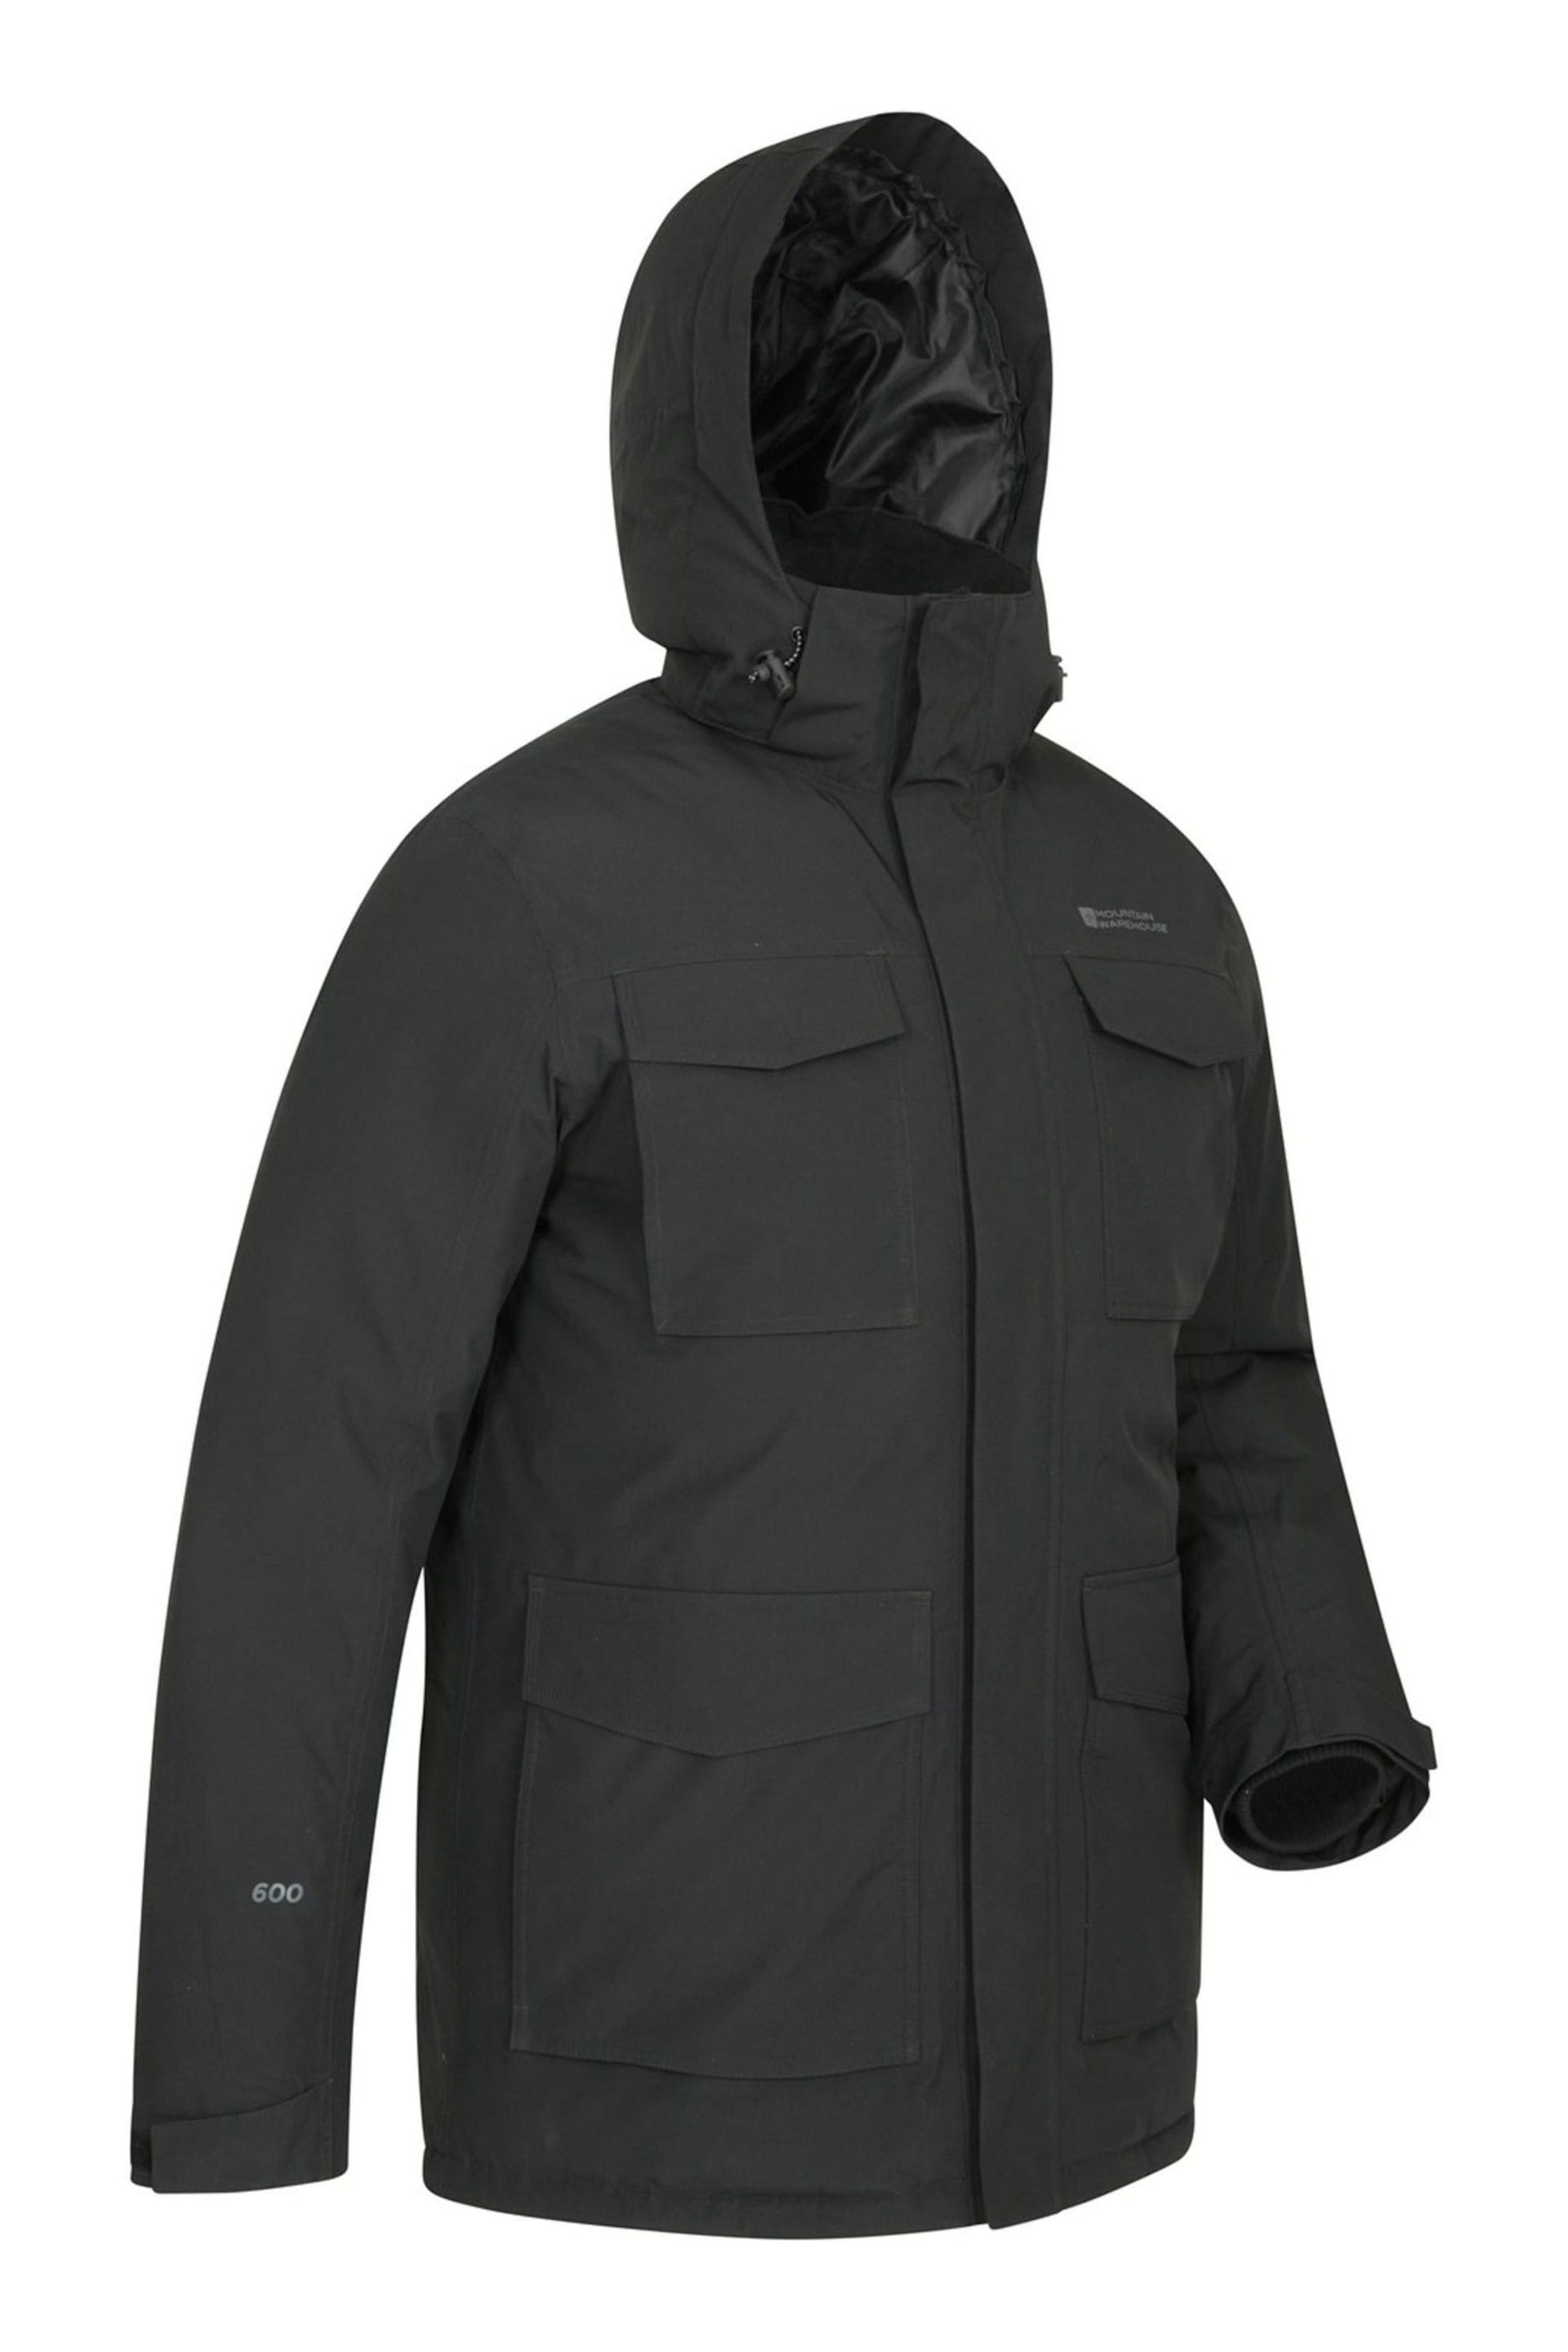 Mountain Warehouse Black Concord Waterproof Extreme Mens Down Long Jacket - Image 2 of 5